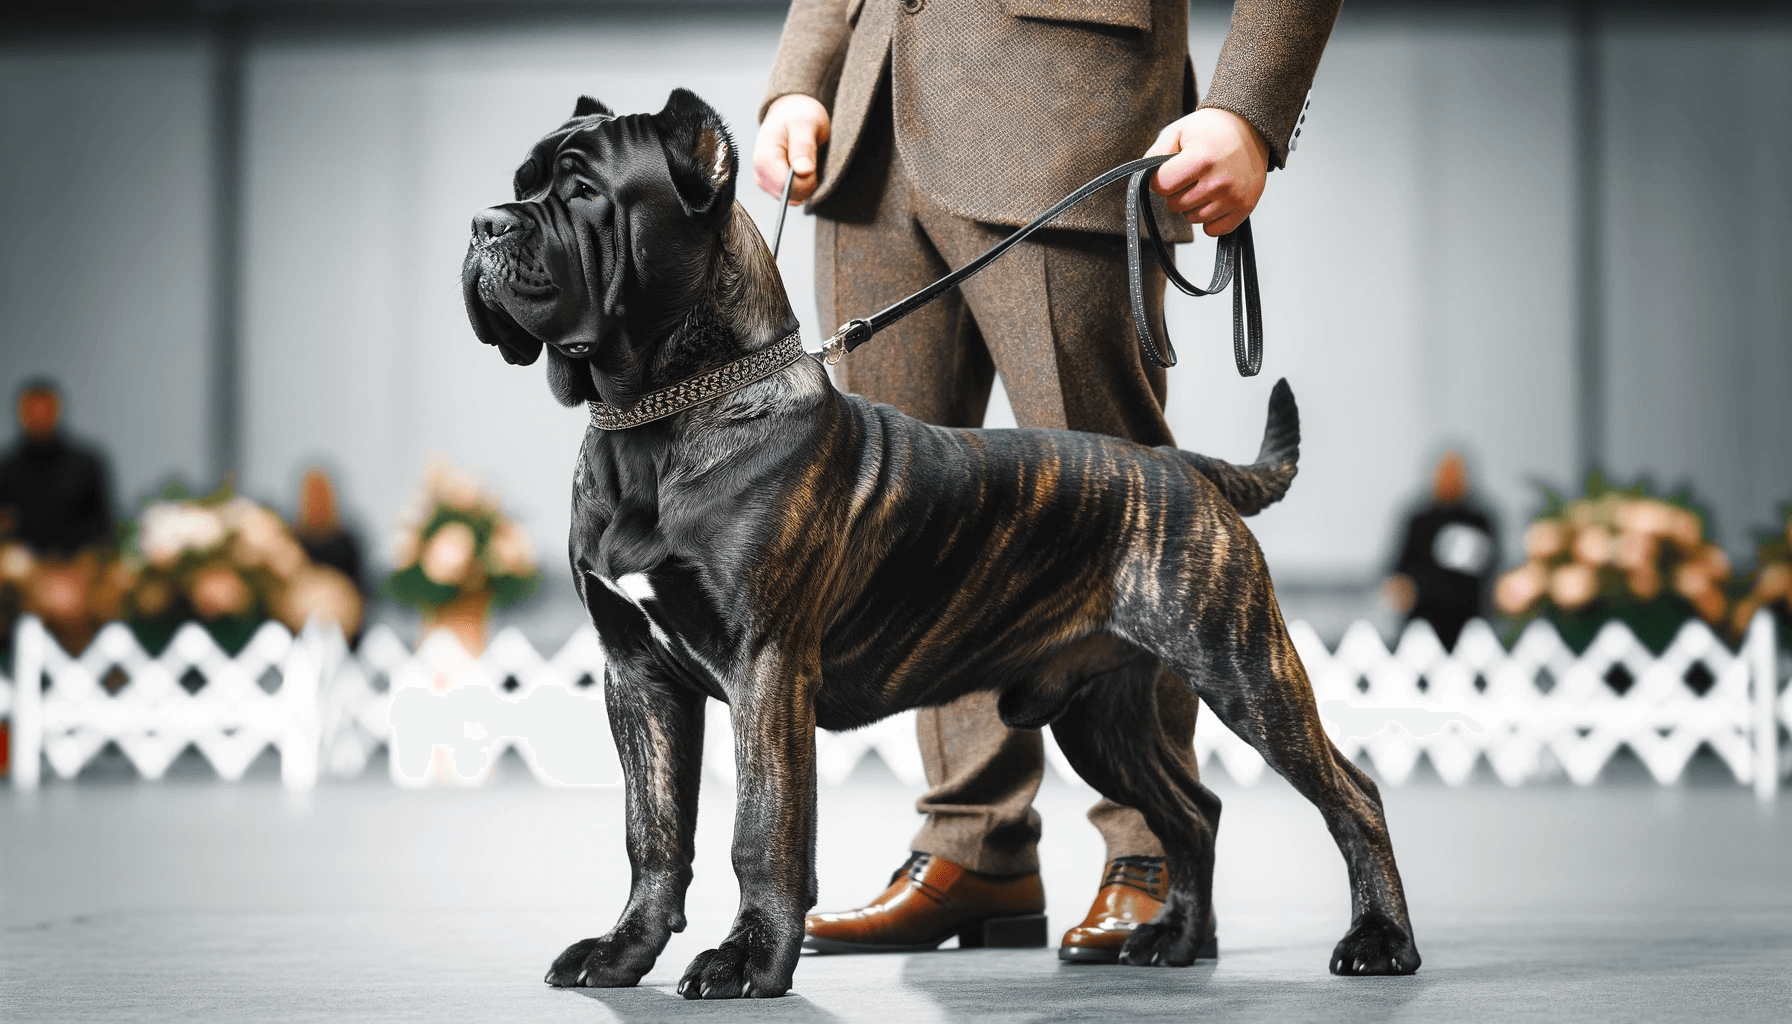 A brindle Cane Corso dog in a show ring stance, held on a leash by a handler, displaying the breed's conformation and elegance.